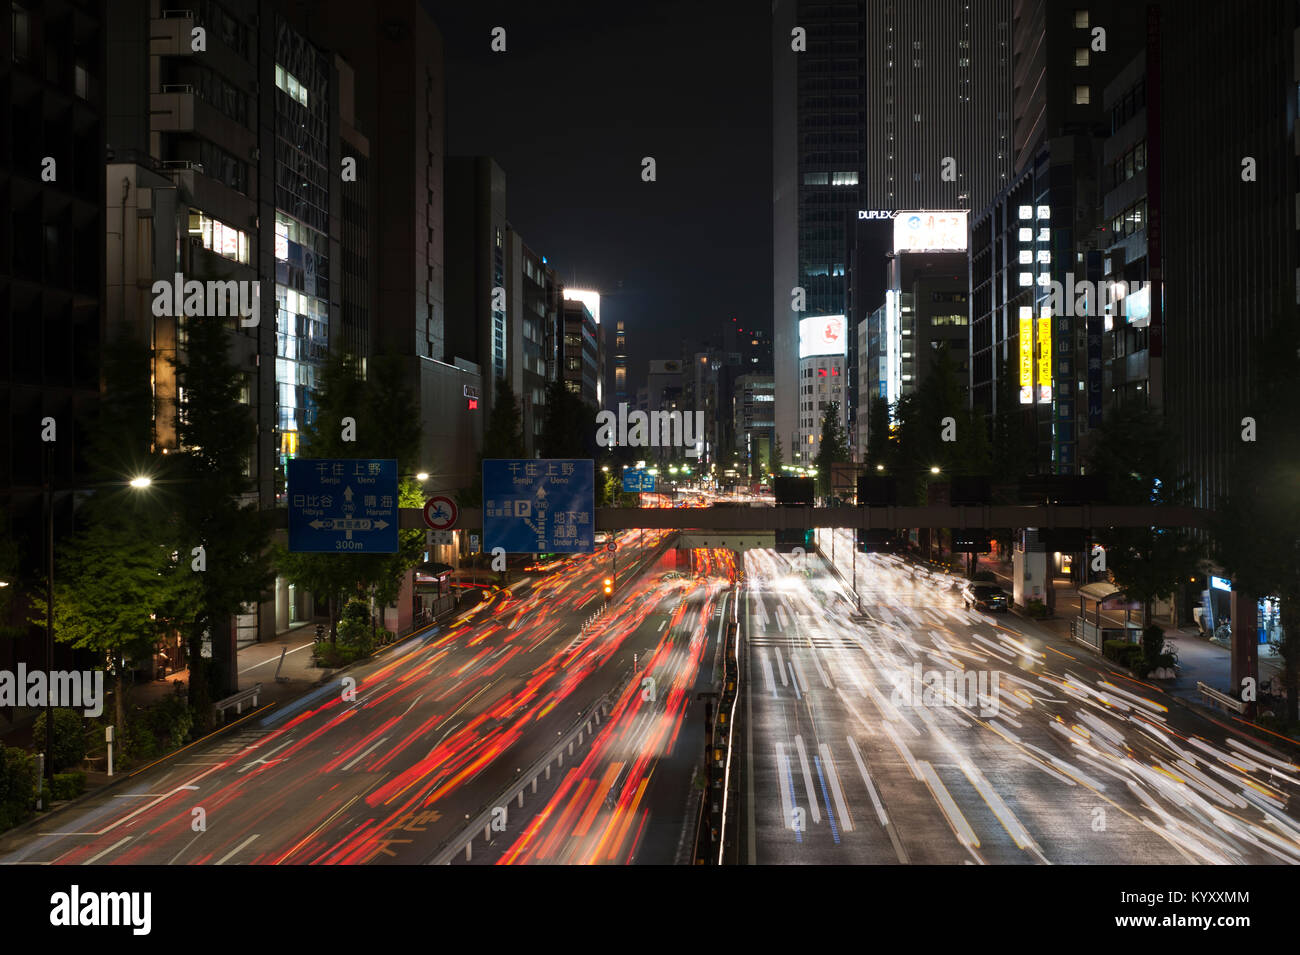 High angle view of traffic light trails on city street with Tokyo Sky Tree in background Stock Photo